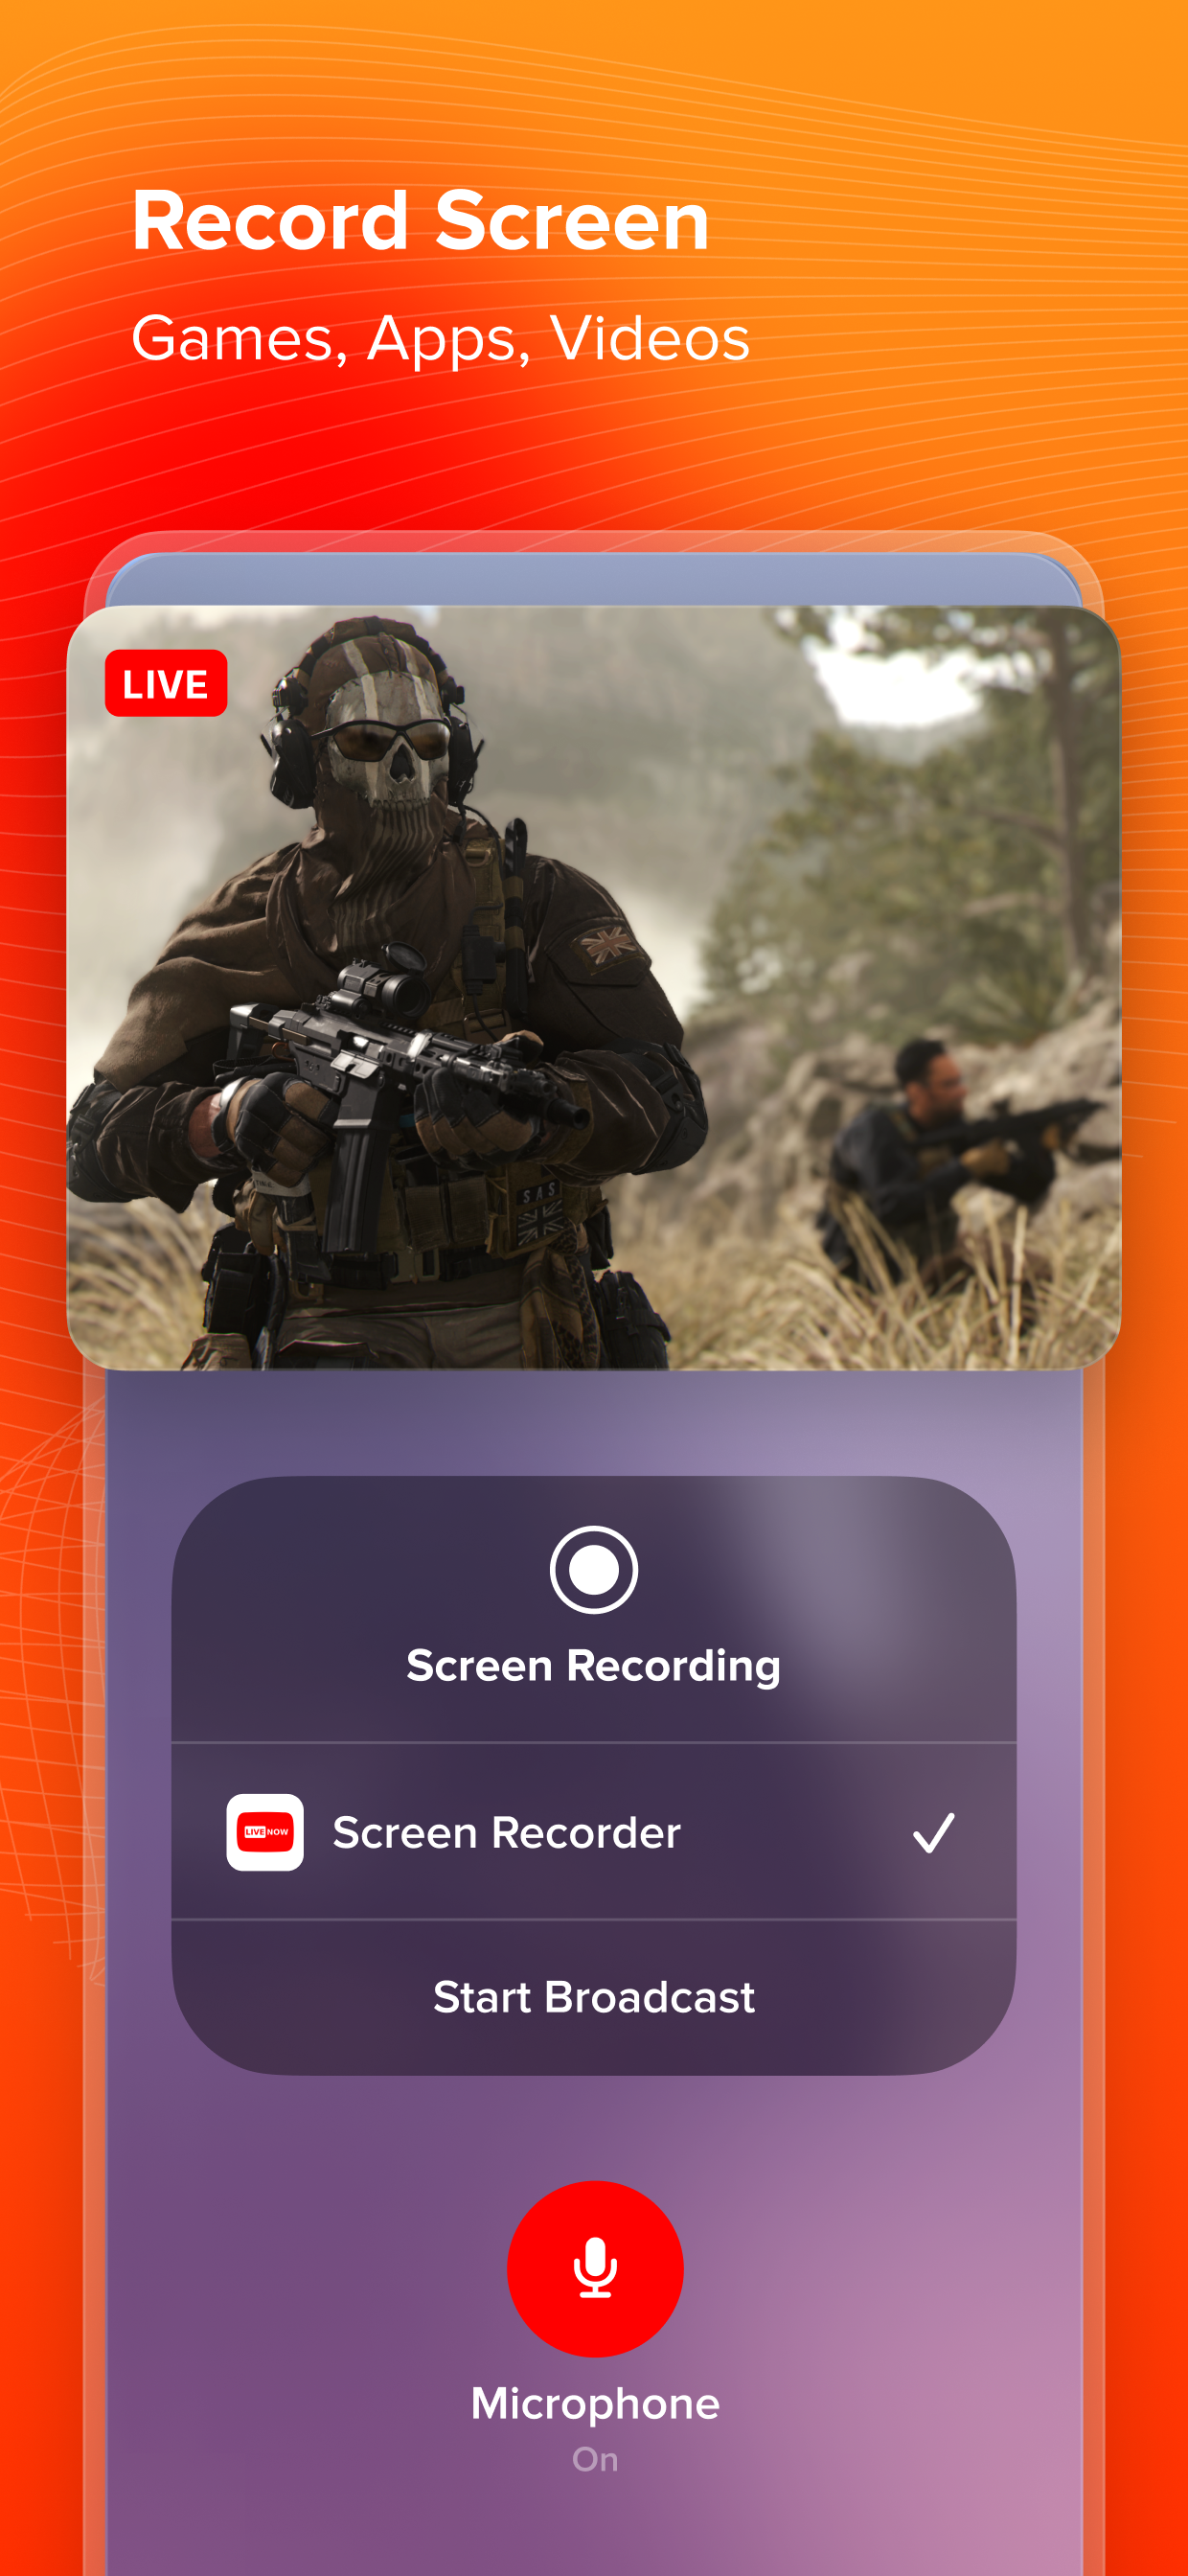 Screen Recording feature for games, apps, videos streaming